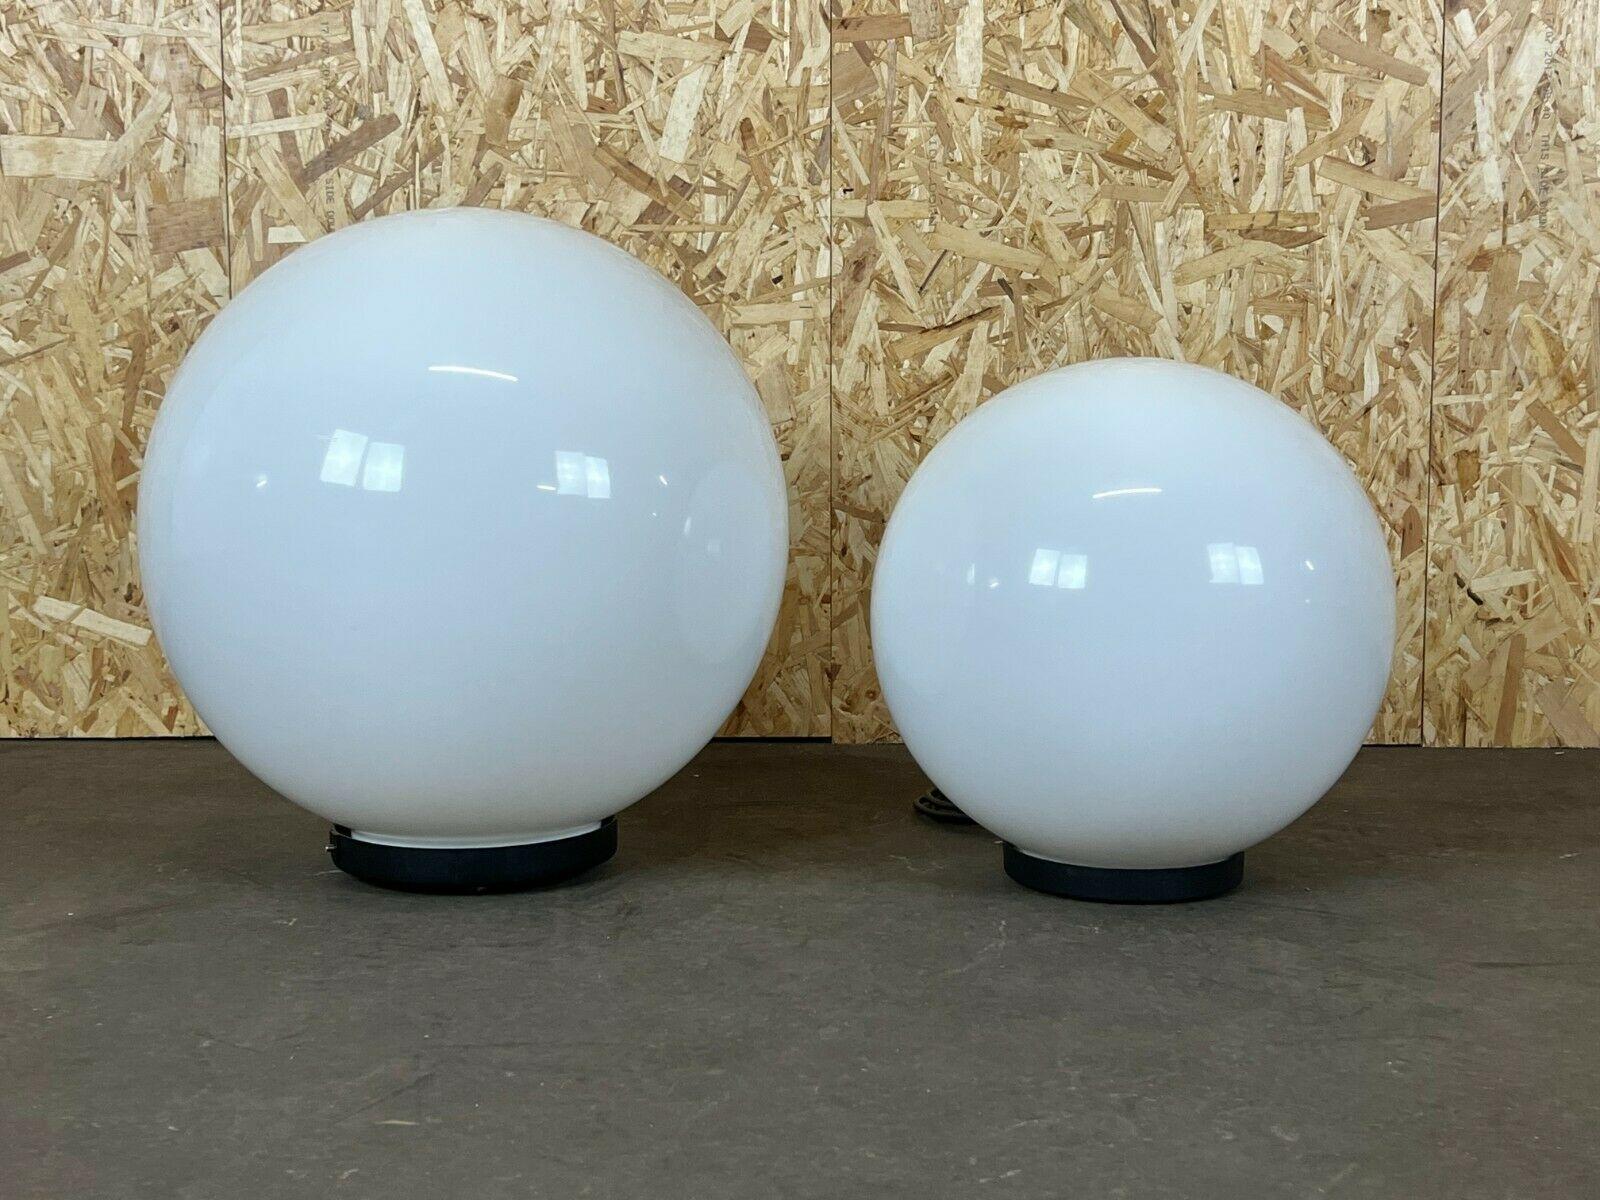 2x 60s 70s Ball lamp floor lamp Acrilico PMMA made in Italy design 60s.

Object: 2x ball lamp

Manufacturer:

Condition: good - vintage

Age: around 1960-1970

Dimensions:

Diameter = 40cm & 50cm

Other notes:

- Plastic -

The